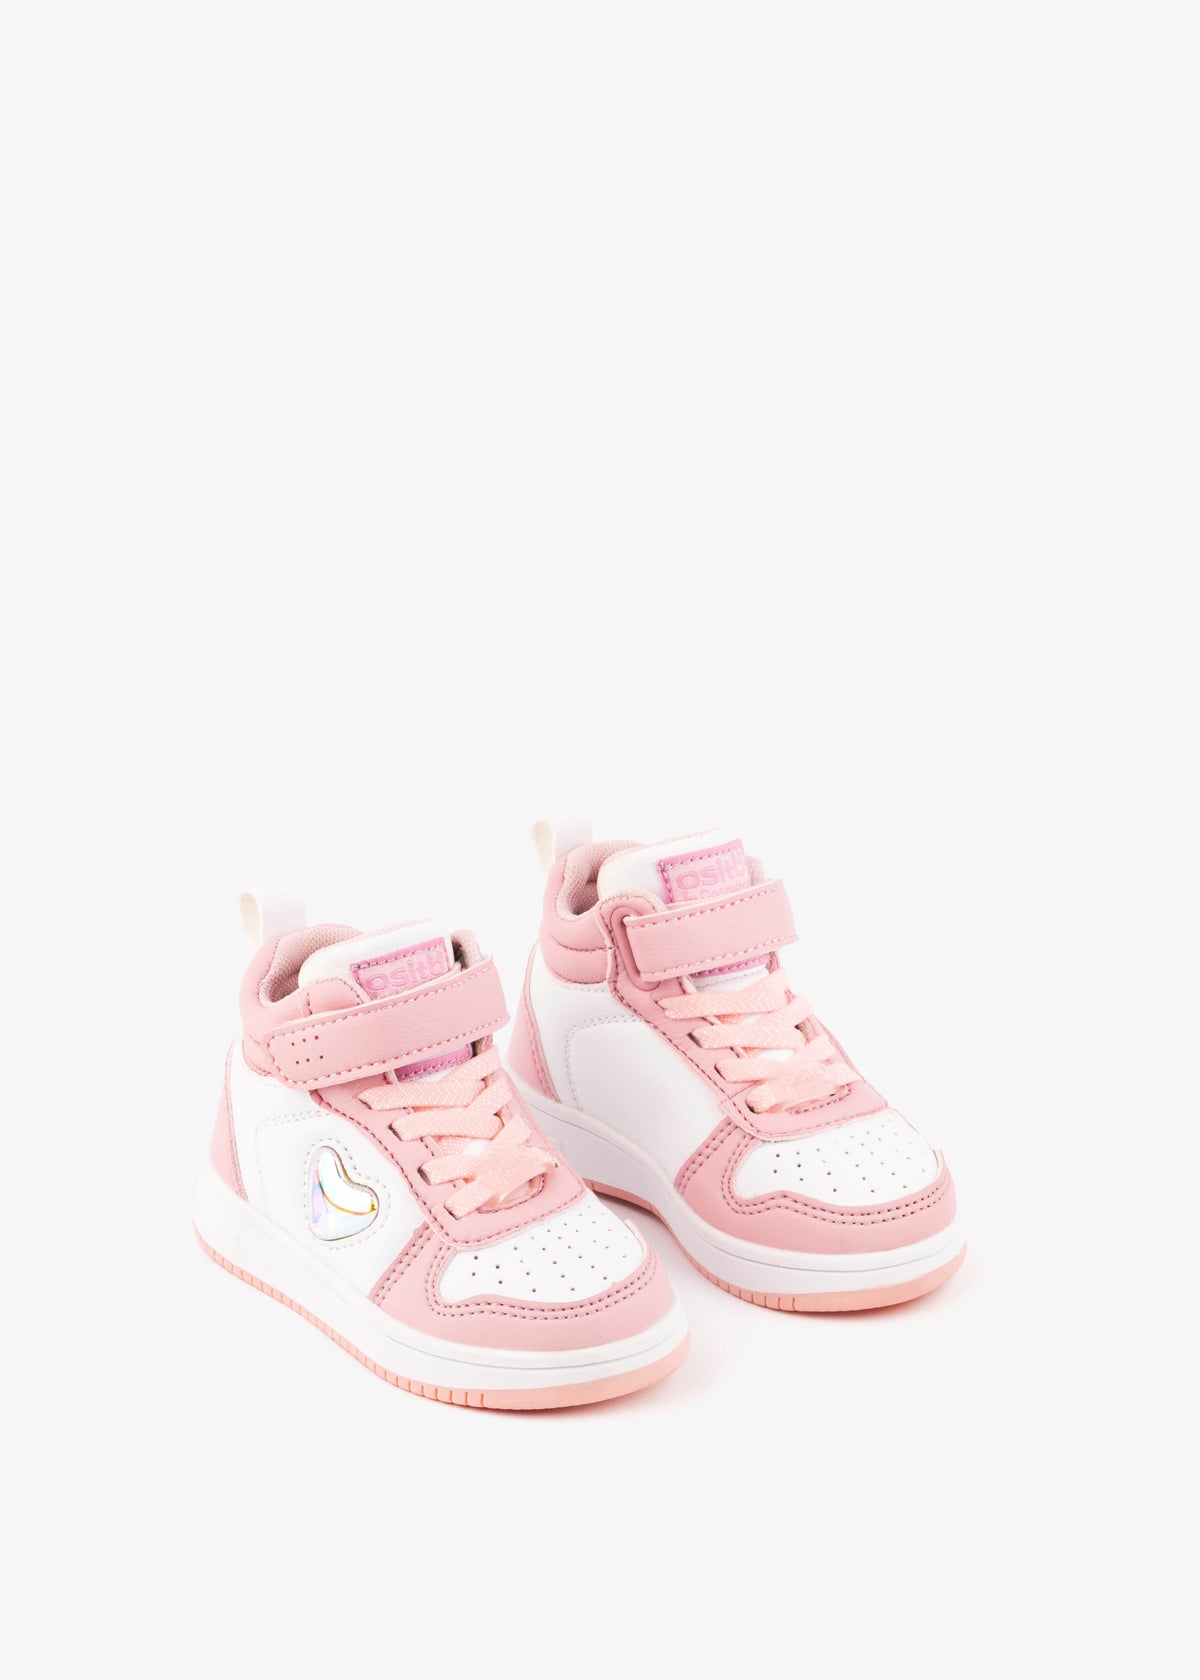 OSITO Shoes Baby's Pink / White With Lights Hi-Top Sneakers